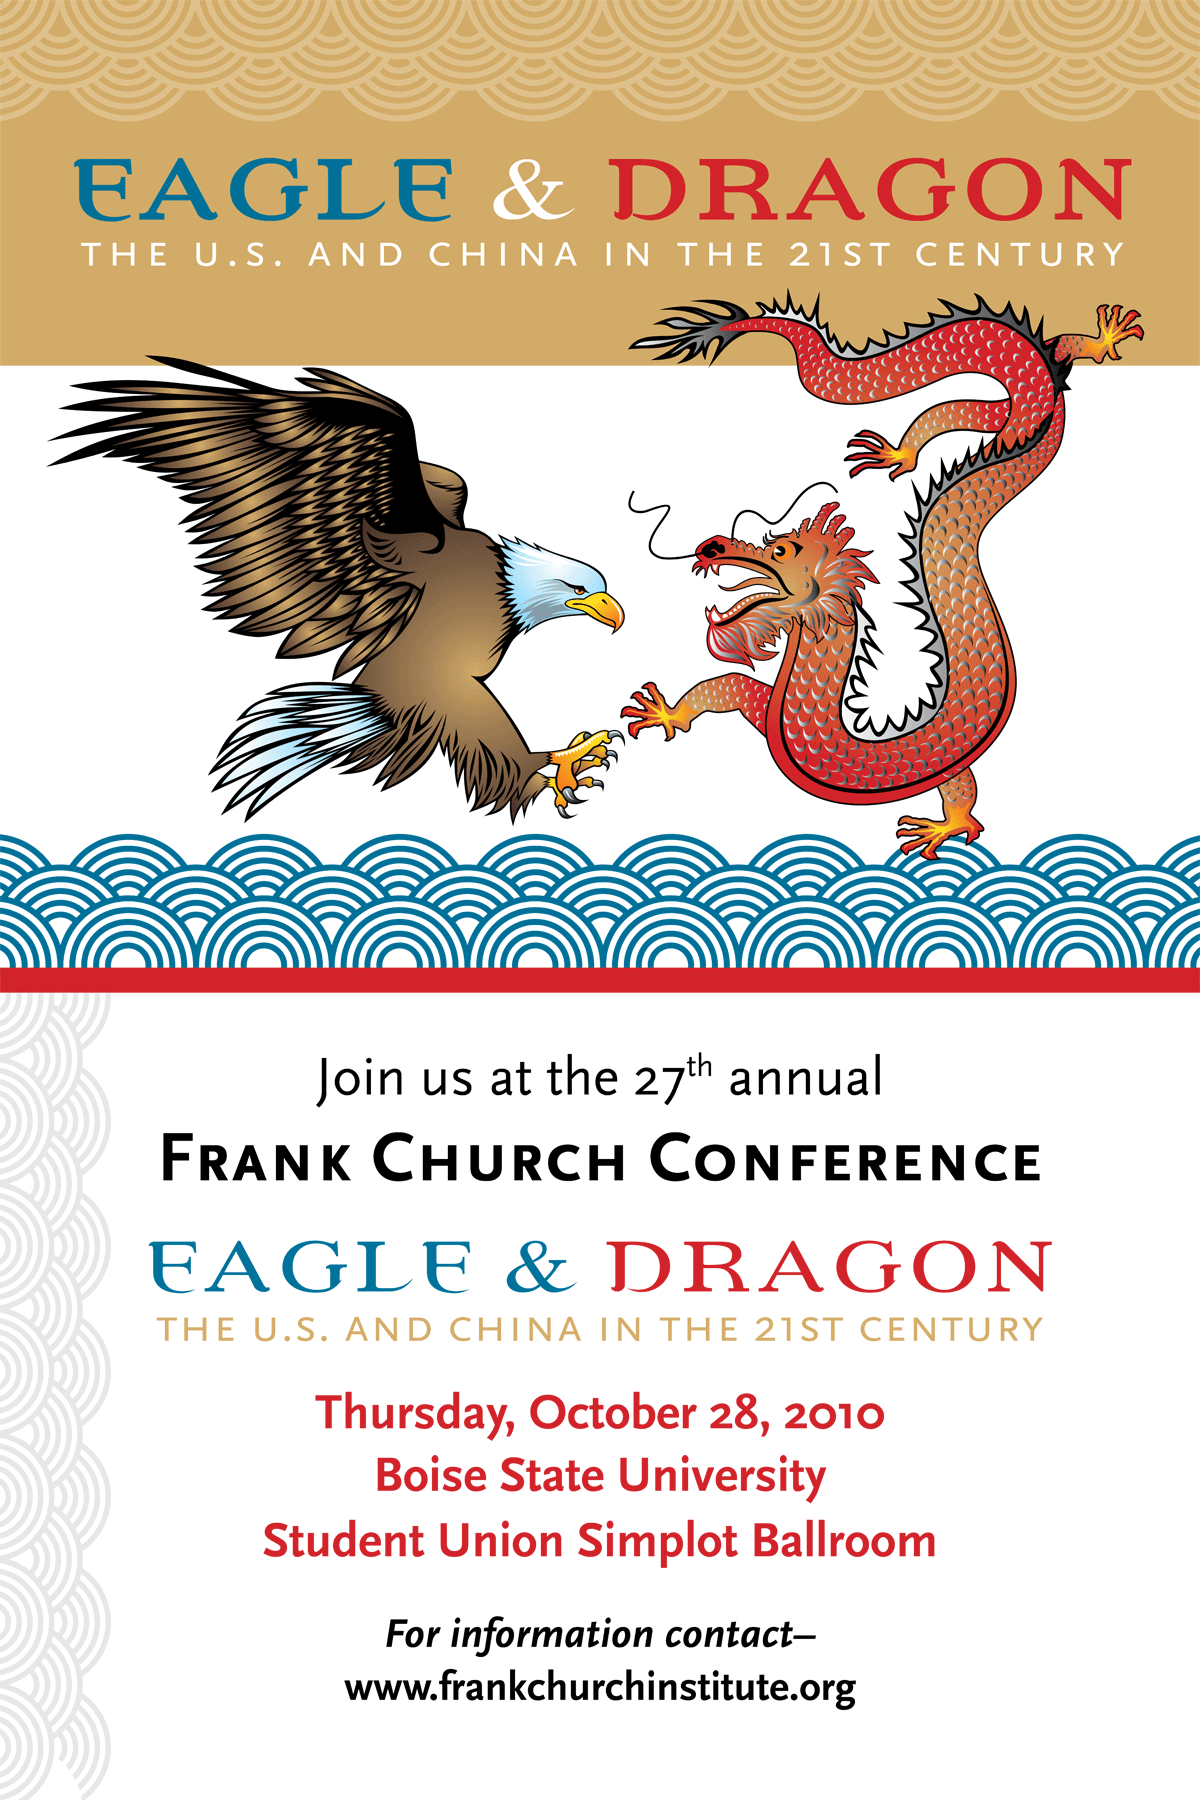  Conference poster depicting an eagle engaging with a dragon over a body of water